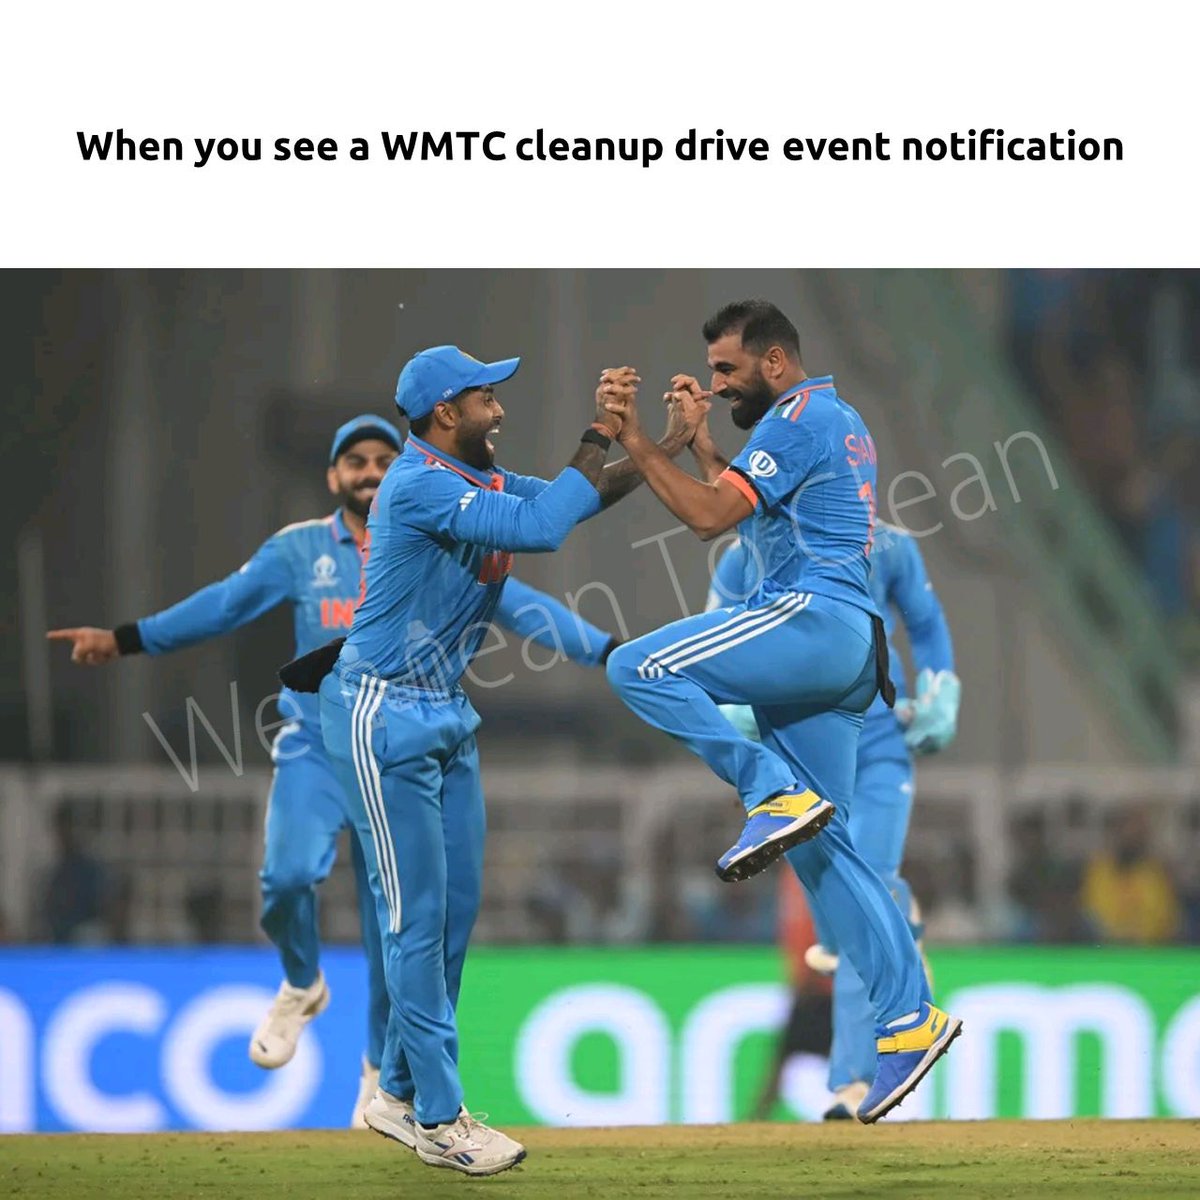 We're back with our weekend drives. Join us, visit wmtc.org.in #WeMeanToClean #CleanDelhi #SwachhBharat #MyCleanIndia #AirPollution #WasteManagement #WMTCMemes #MohammadShami #Shami #SKY #ViratKohli #CWC23 #CricketMemes